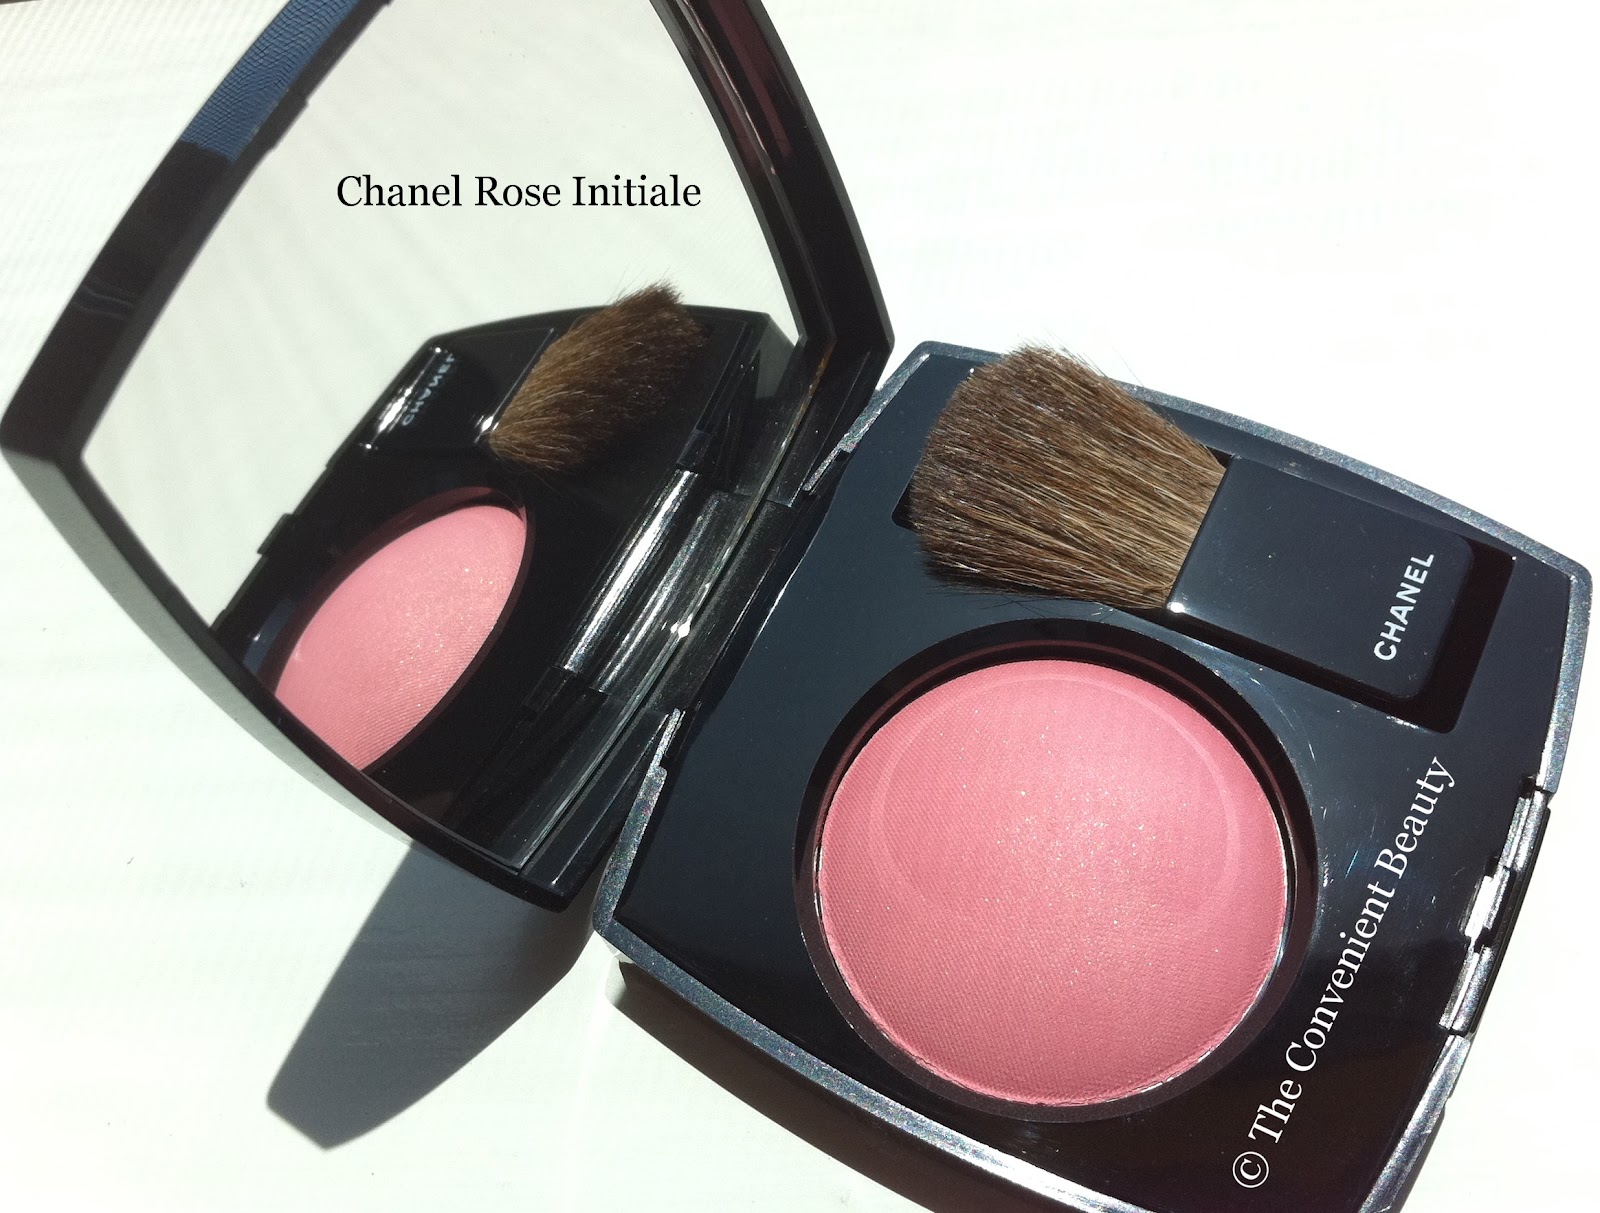 Joues Rose 2012 Initiale Chanel Review: The Contraste in Beauty: Convenient Fall